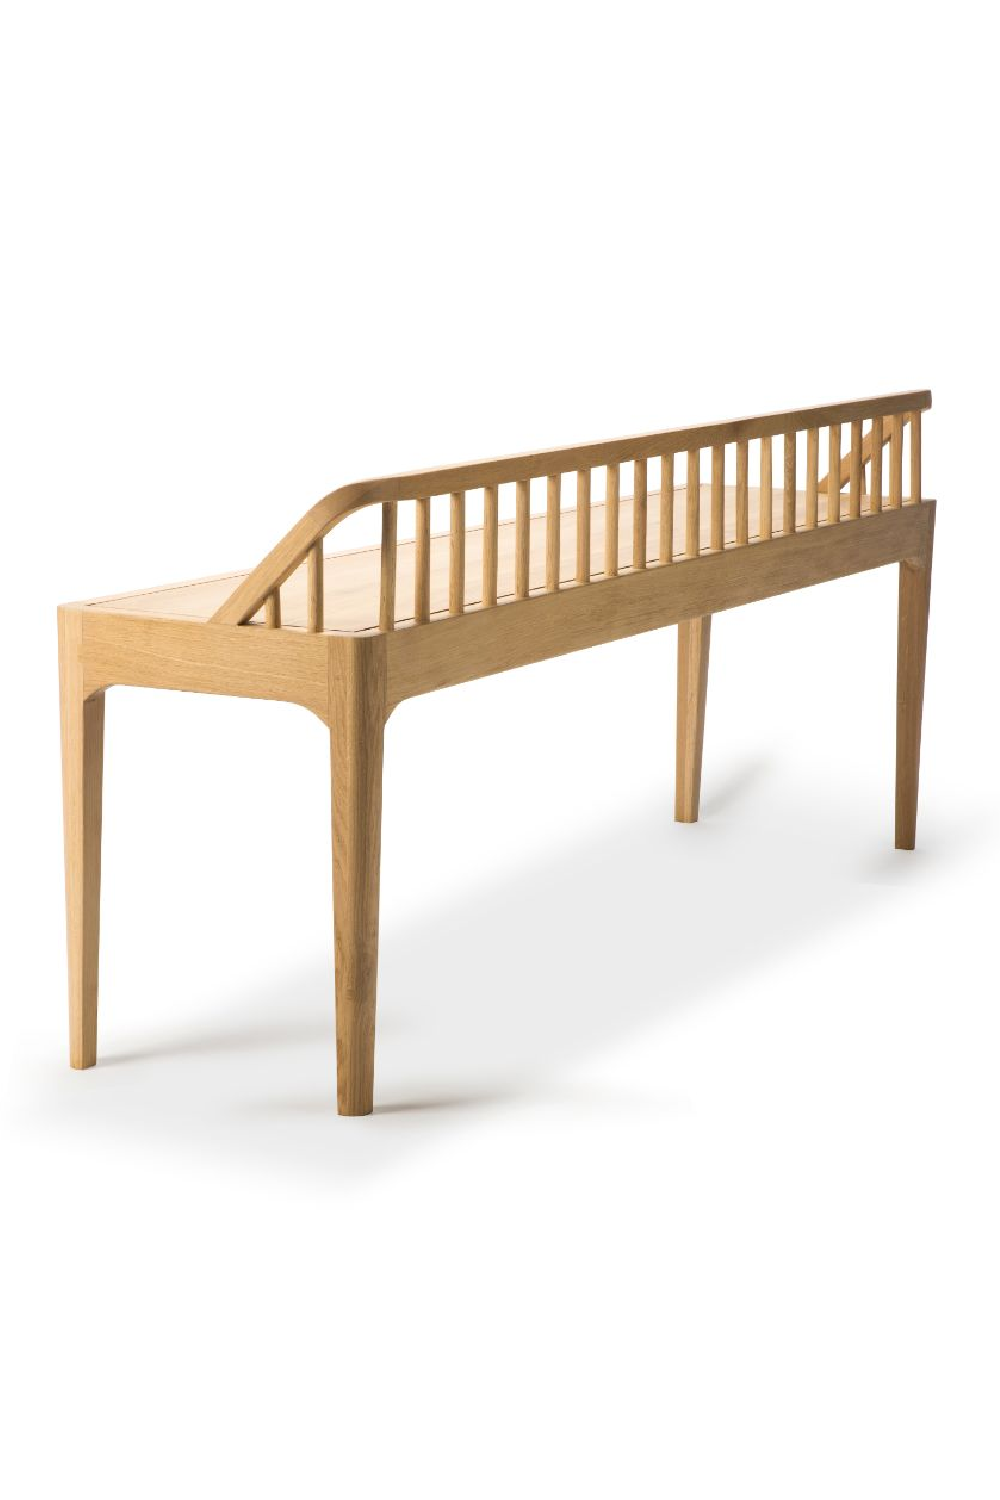 Modern Nordic Bench | Ethnicraft Spindle | Oroa.com